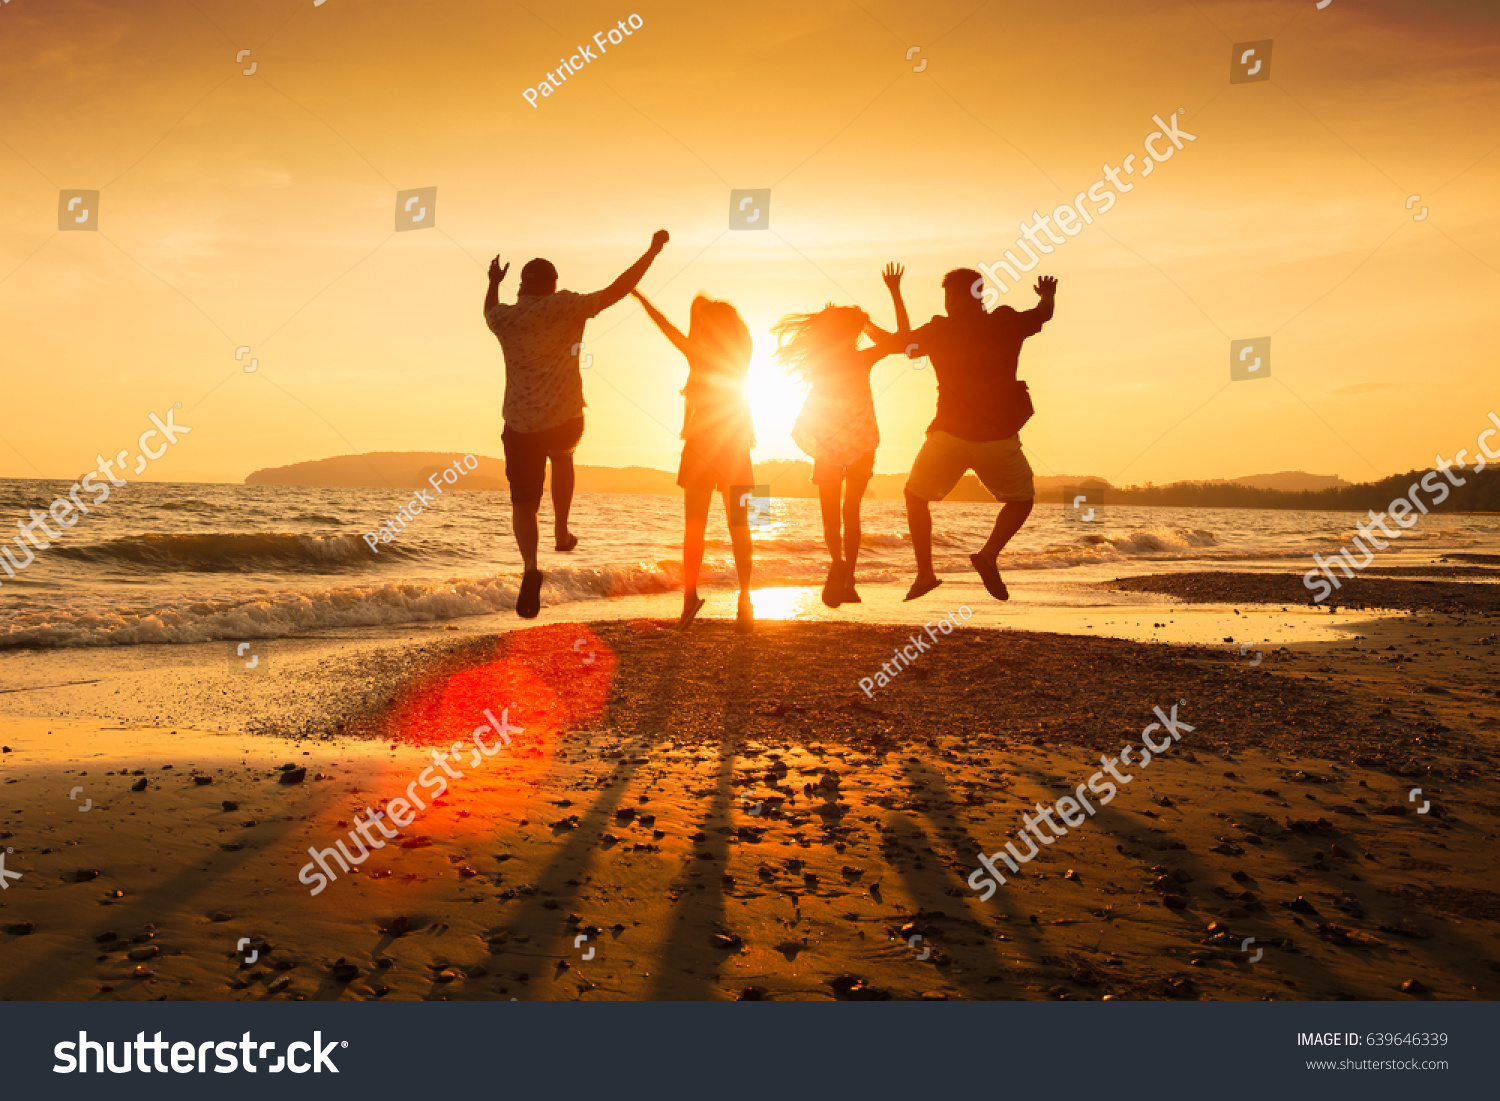 Asian family running on background of sunset beach and sea #639646339